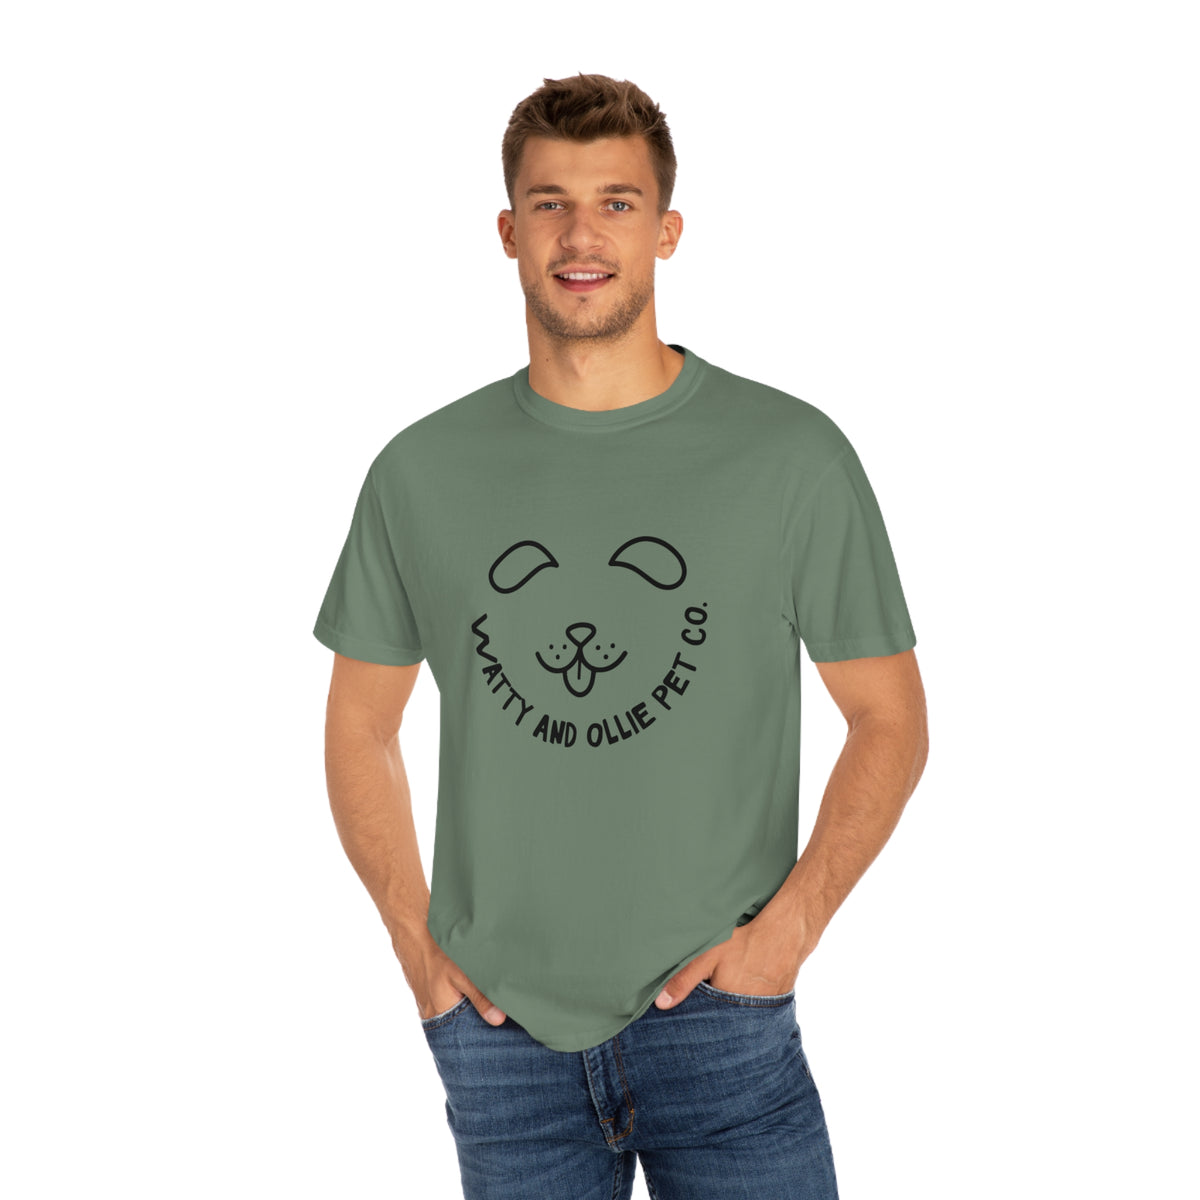 Watty and Ollie Unisex Garment-Dyed T-shirt